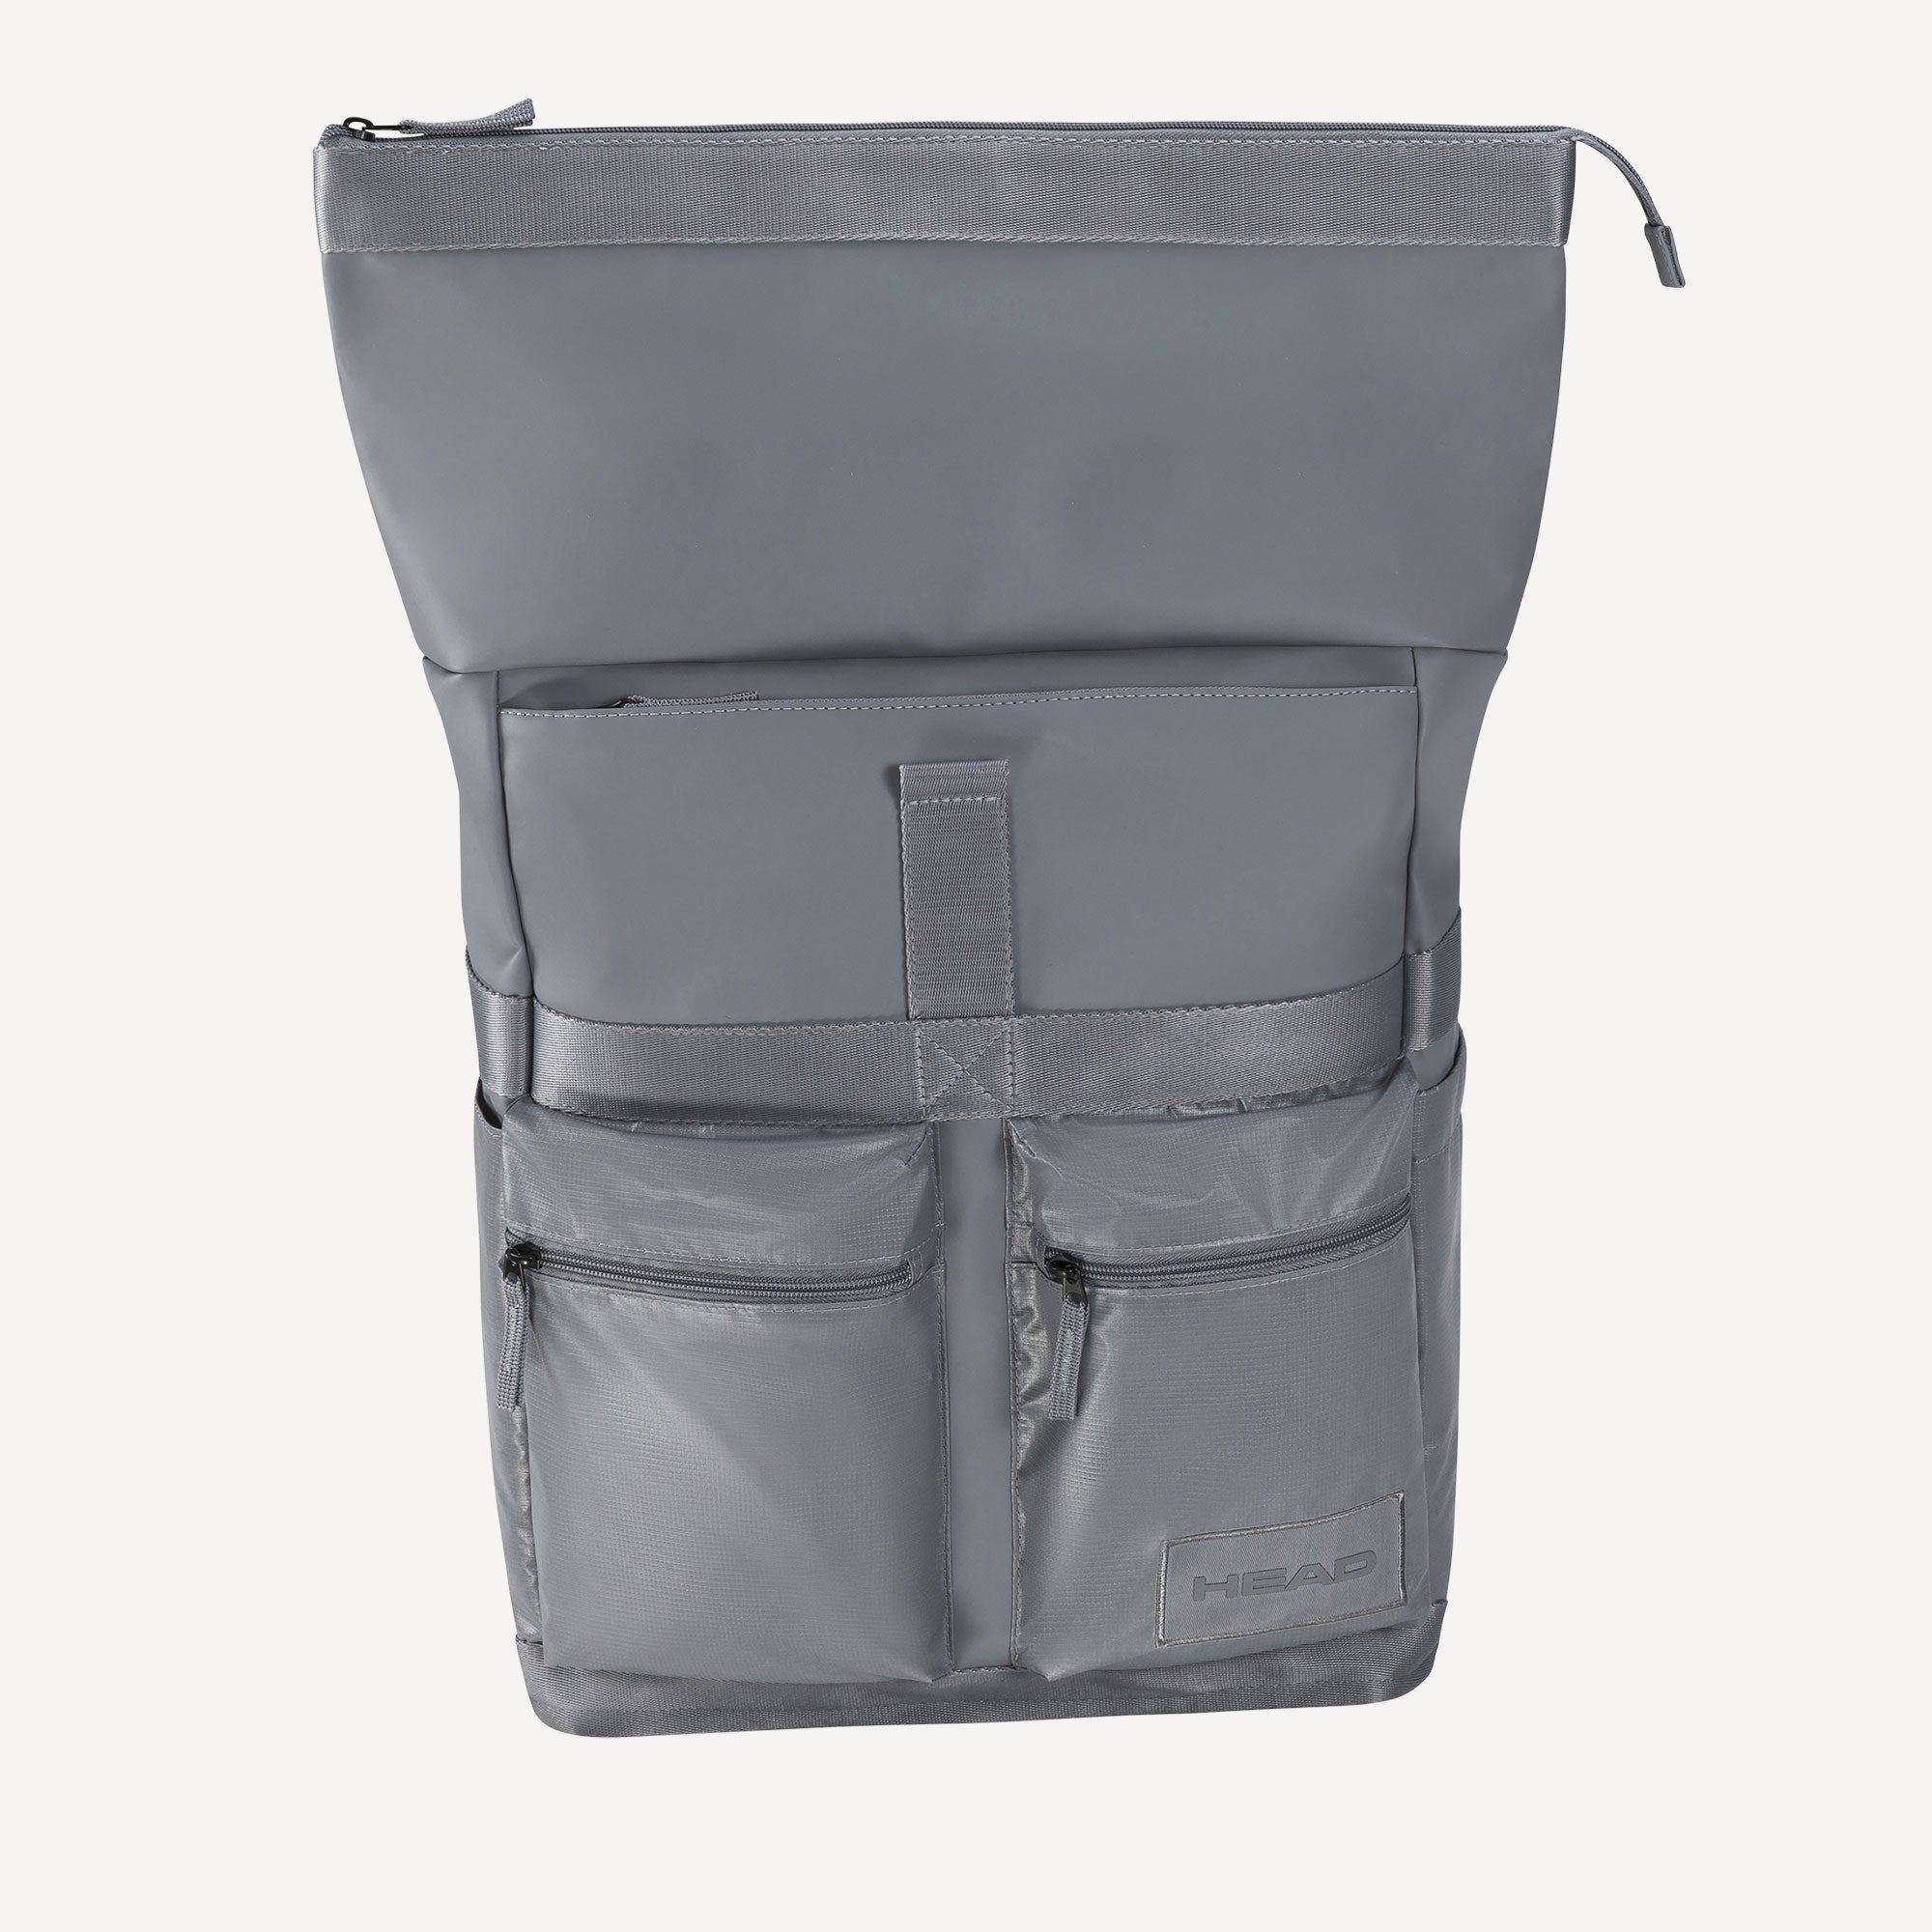 HEAD Coco Tour Tennis Backpack 30L - Grey (3)